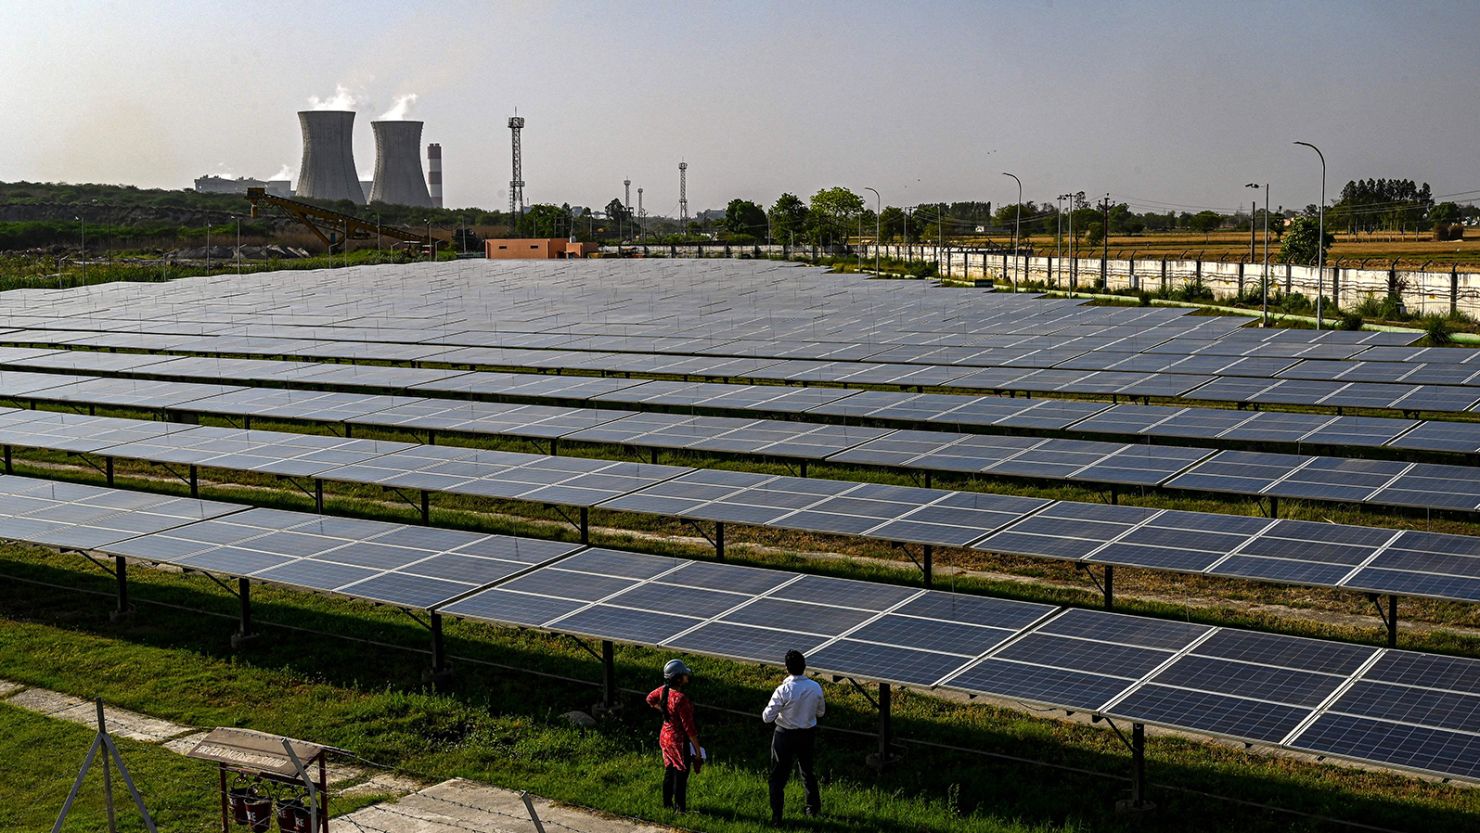 While India's renewable energy sector is rapidly increasing, the country remains largely reliant on coal. Here, solar panels are seen at the National Thermal Power Corporation (NTPC) plant, which is primarily coal-fired. 